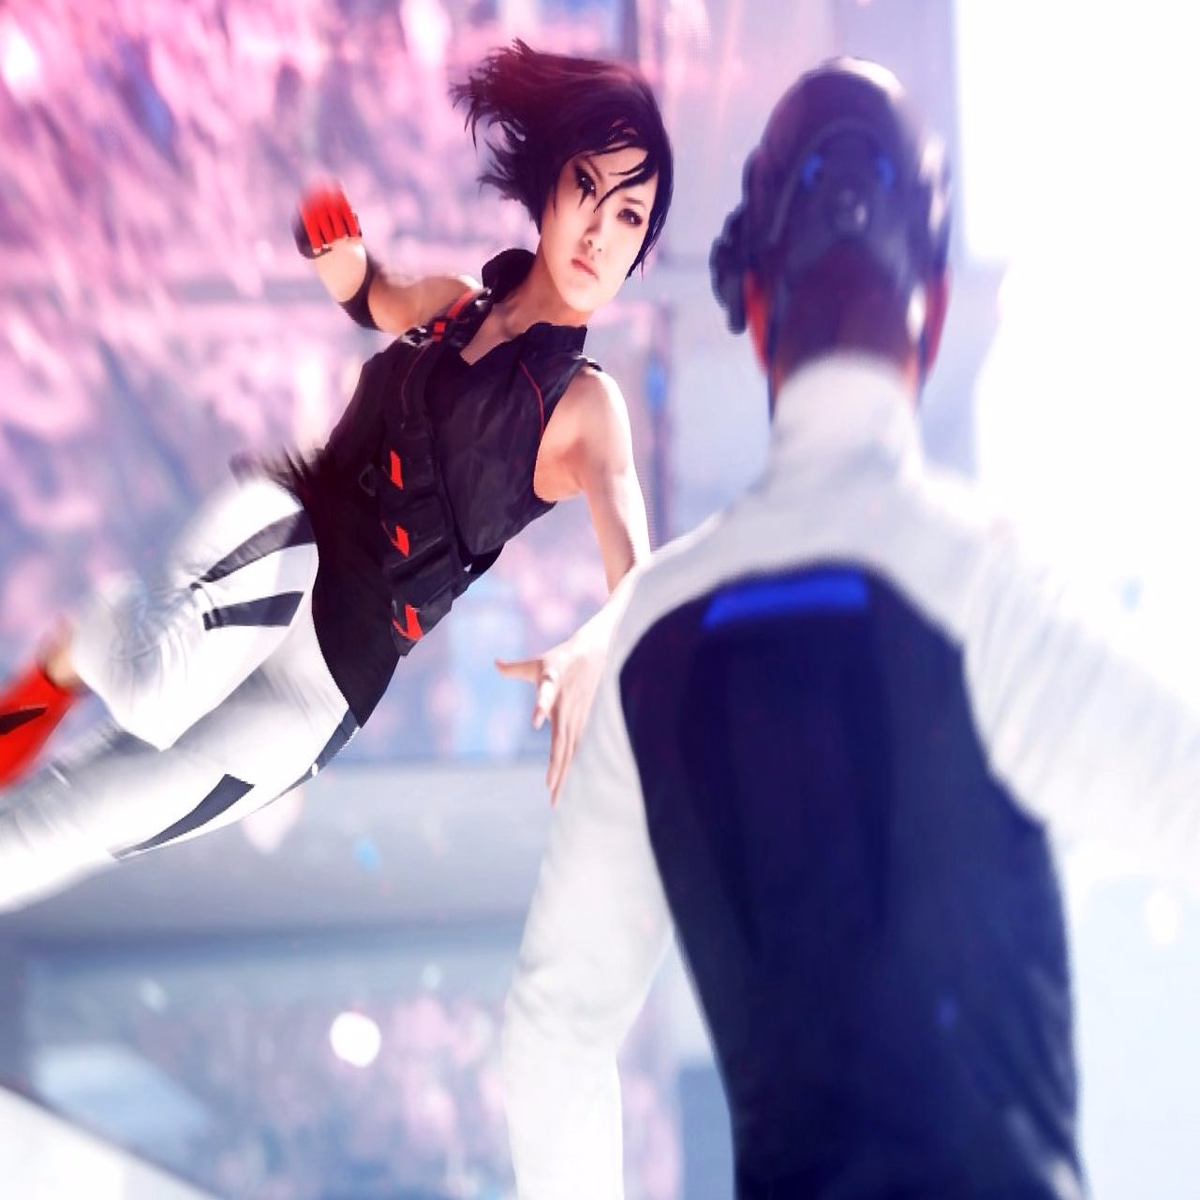 The Creation of Mirror's Edge Catalyst Levels